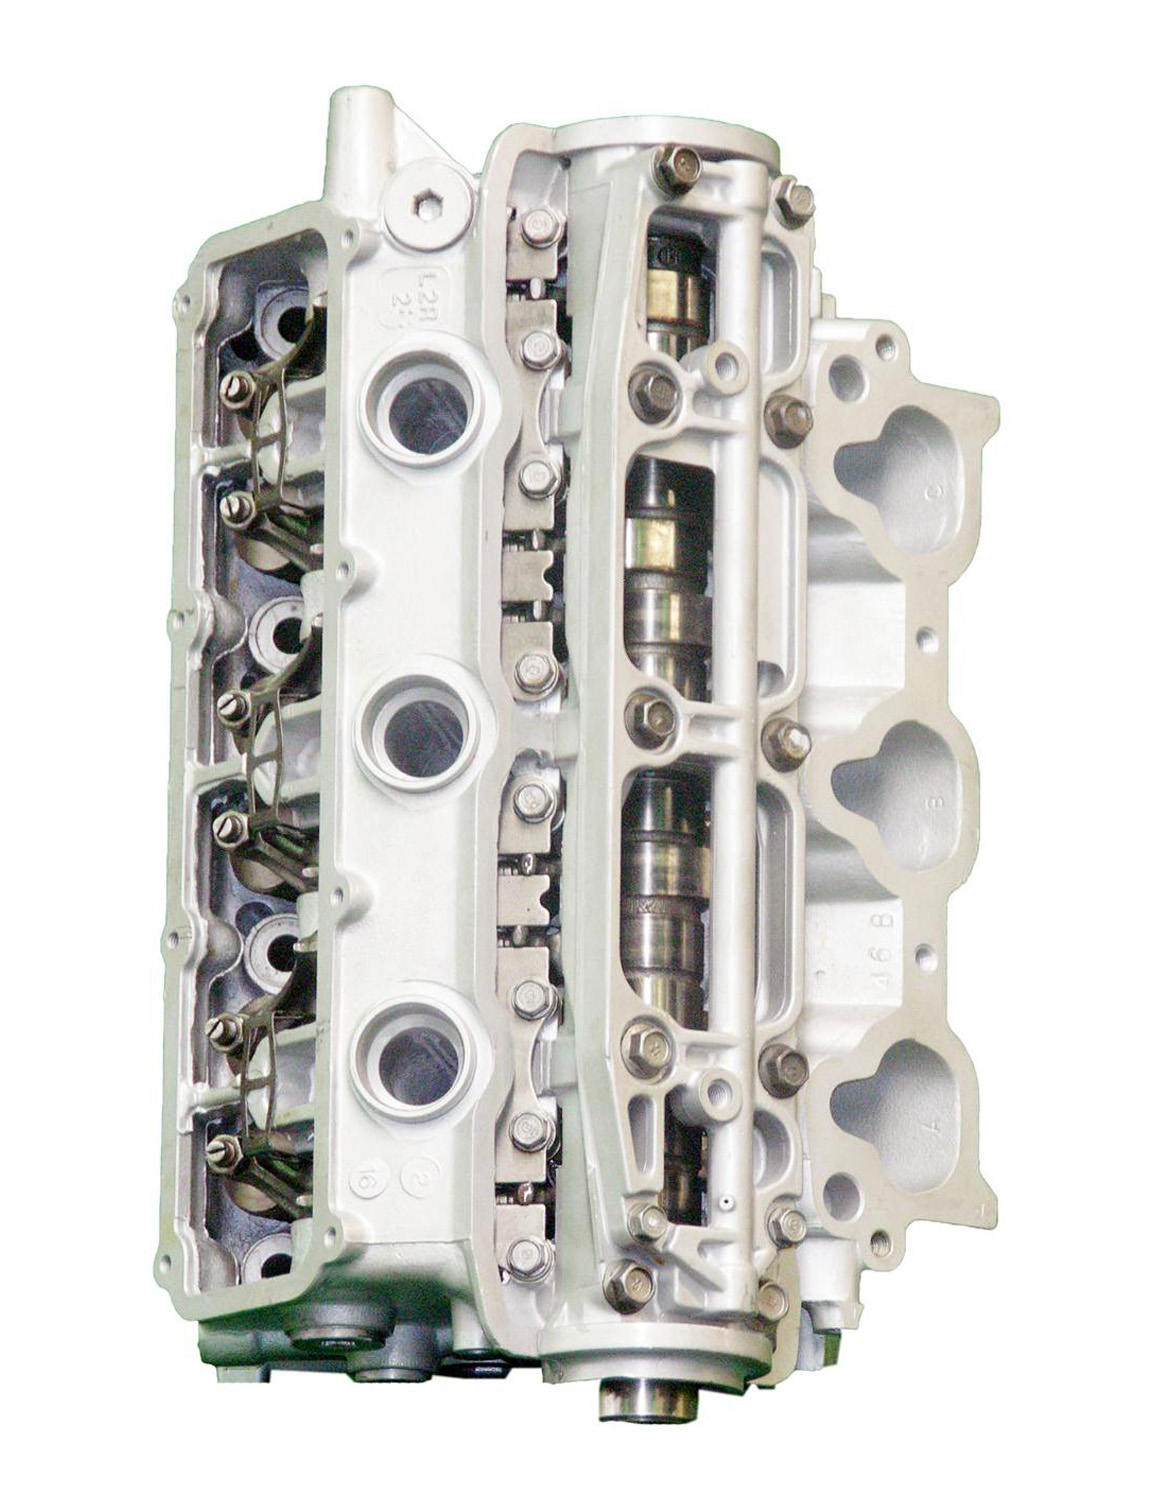 Acura 2.7 V6L Remanufactured Cylinder Head - 1987-1990 C27A1